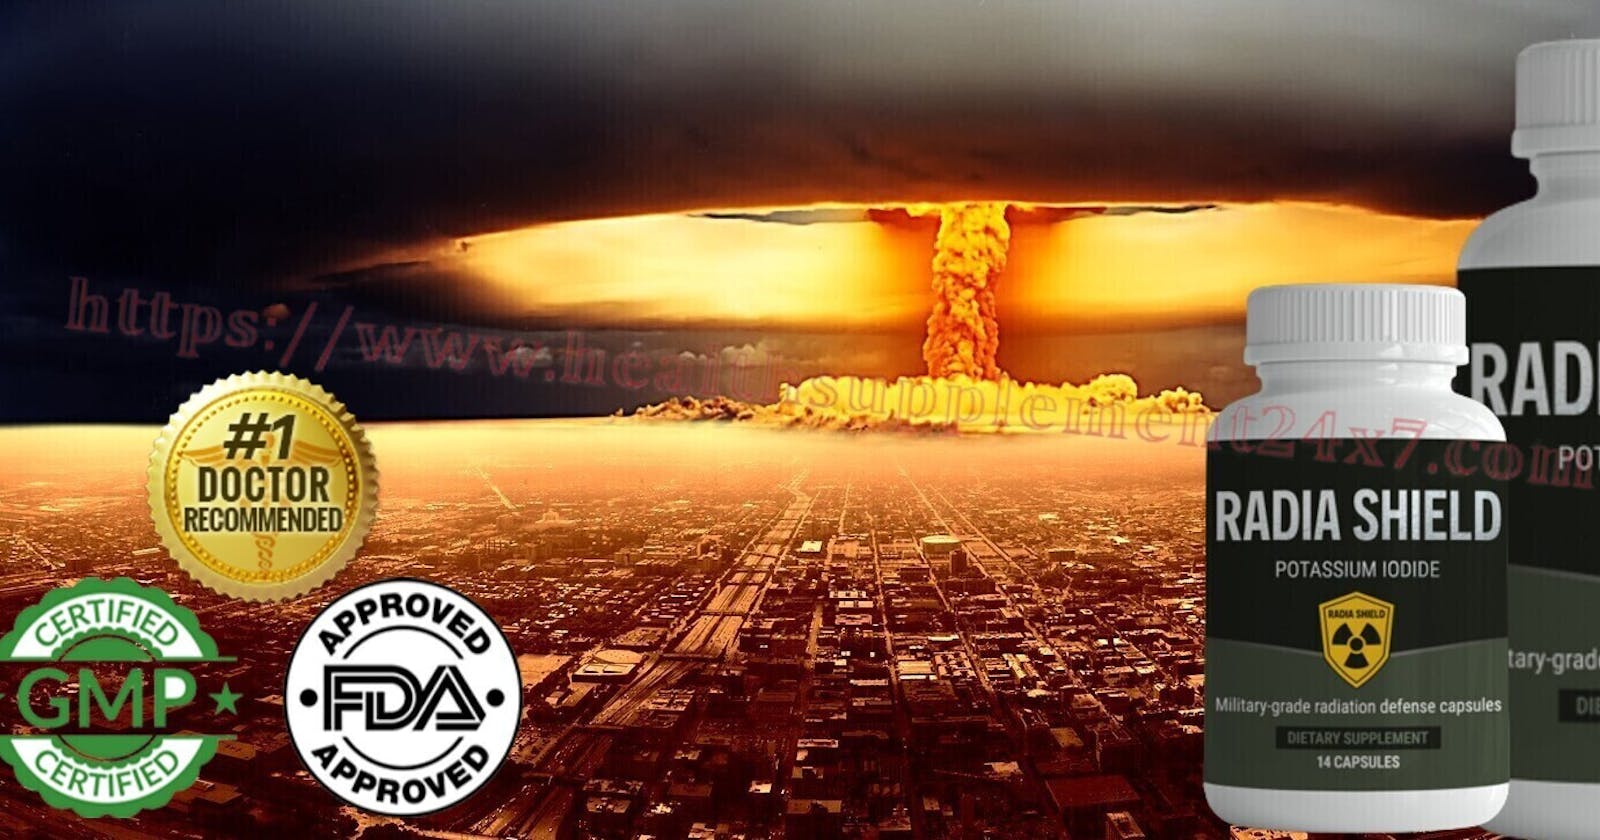 Radia Shield (Potassium Iodide Supplement) Military-Grade Defense Capsules To Protect Officials And Their Families